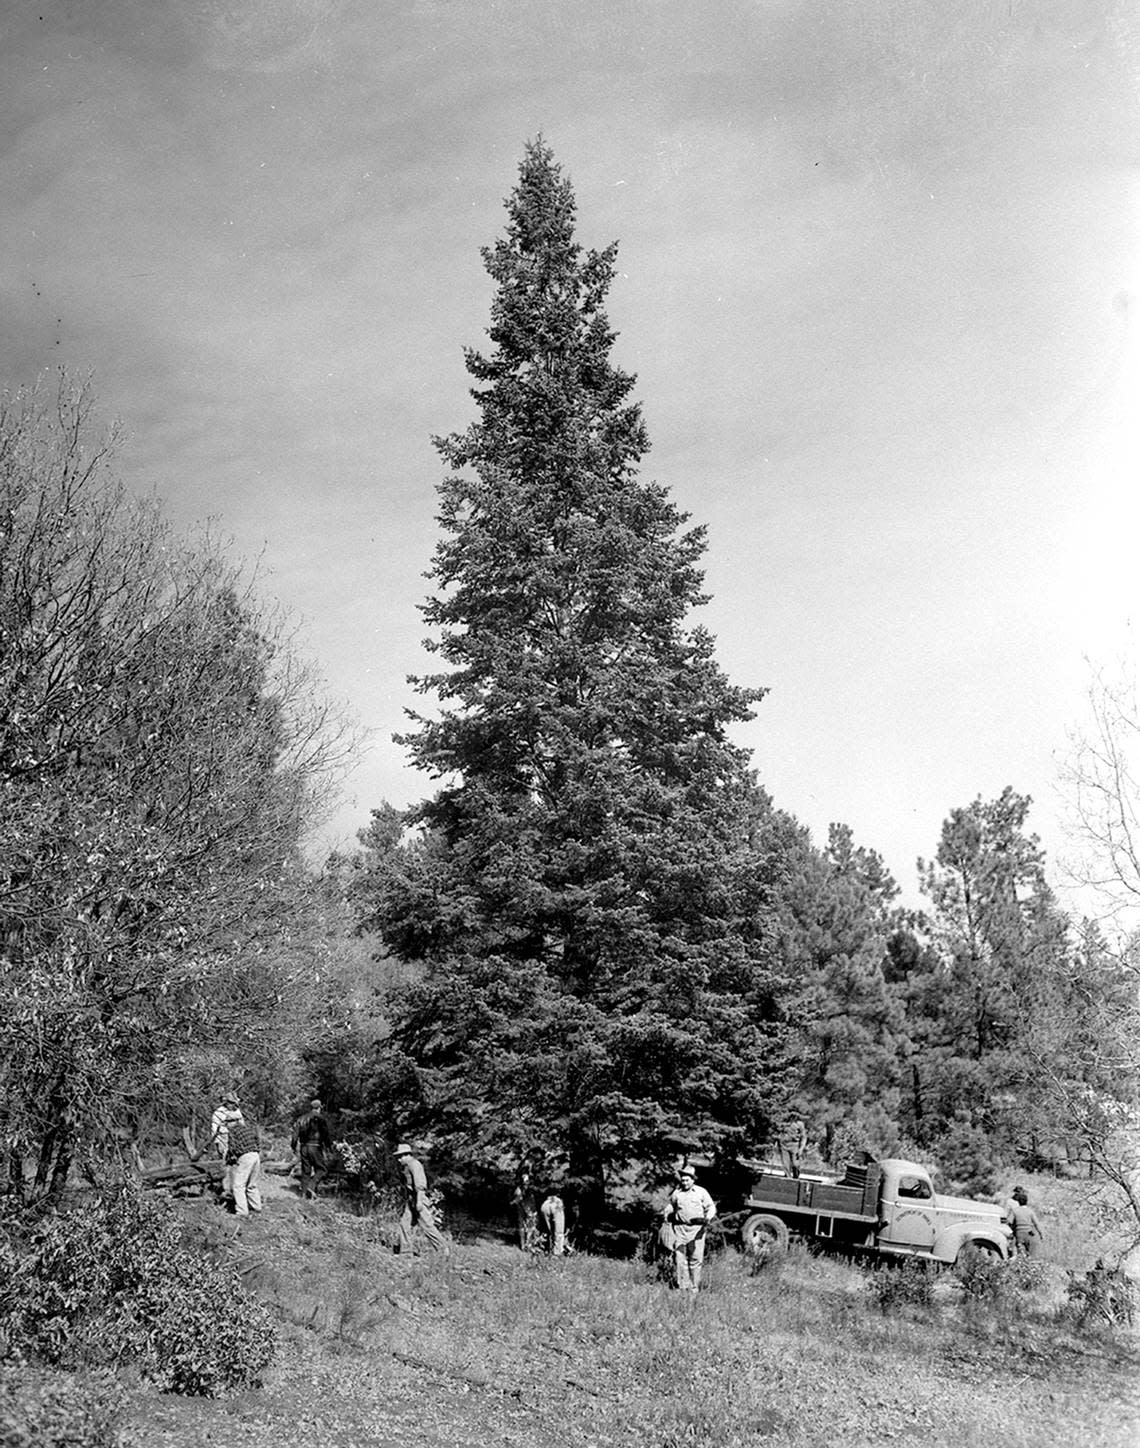 This huge white fir tree, photographed in its native habitat, the towering Sacramento Mountains of New Mexico, was brought by a tree hunting expedition arranged by the Star-Telegram. The tree was erected in Burk Burnett Park for Fort Worth’s first community Christmas celebration in 10 years. The view of the 60-foot tree shows woodsmen clearing underbrush before the tree was cut and lowered with ropes. Published in the Fort Worth Star Telegram morning edition, November 12, 1950.